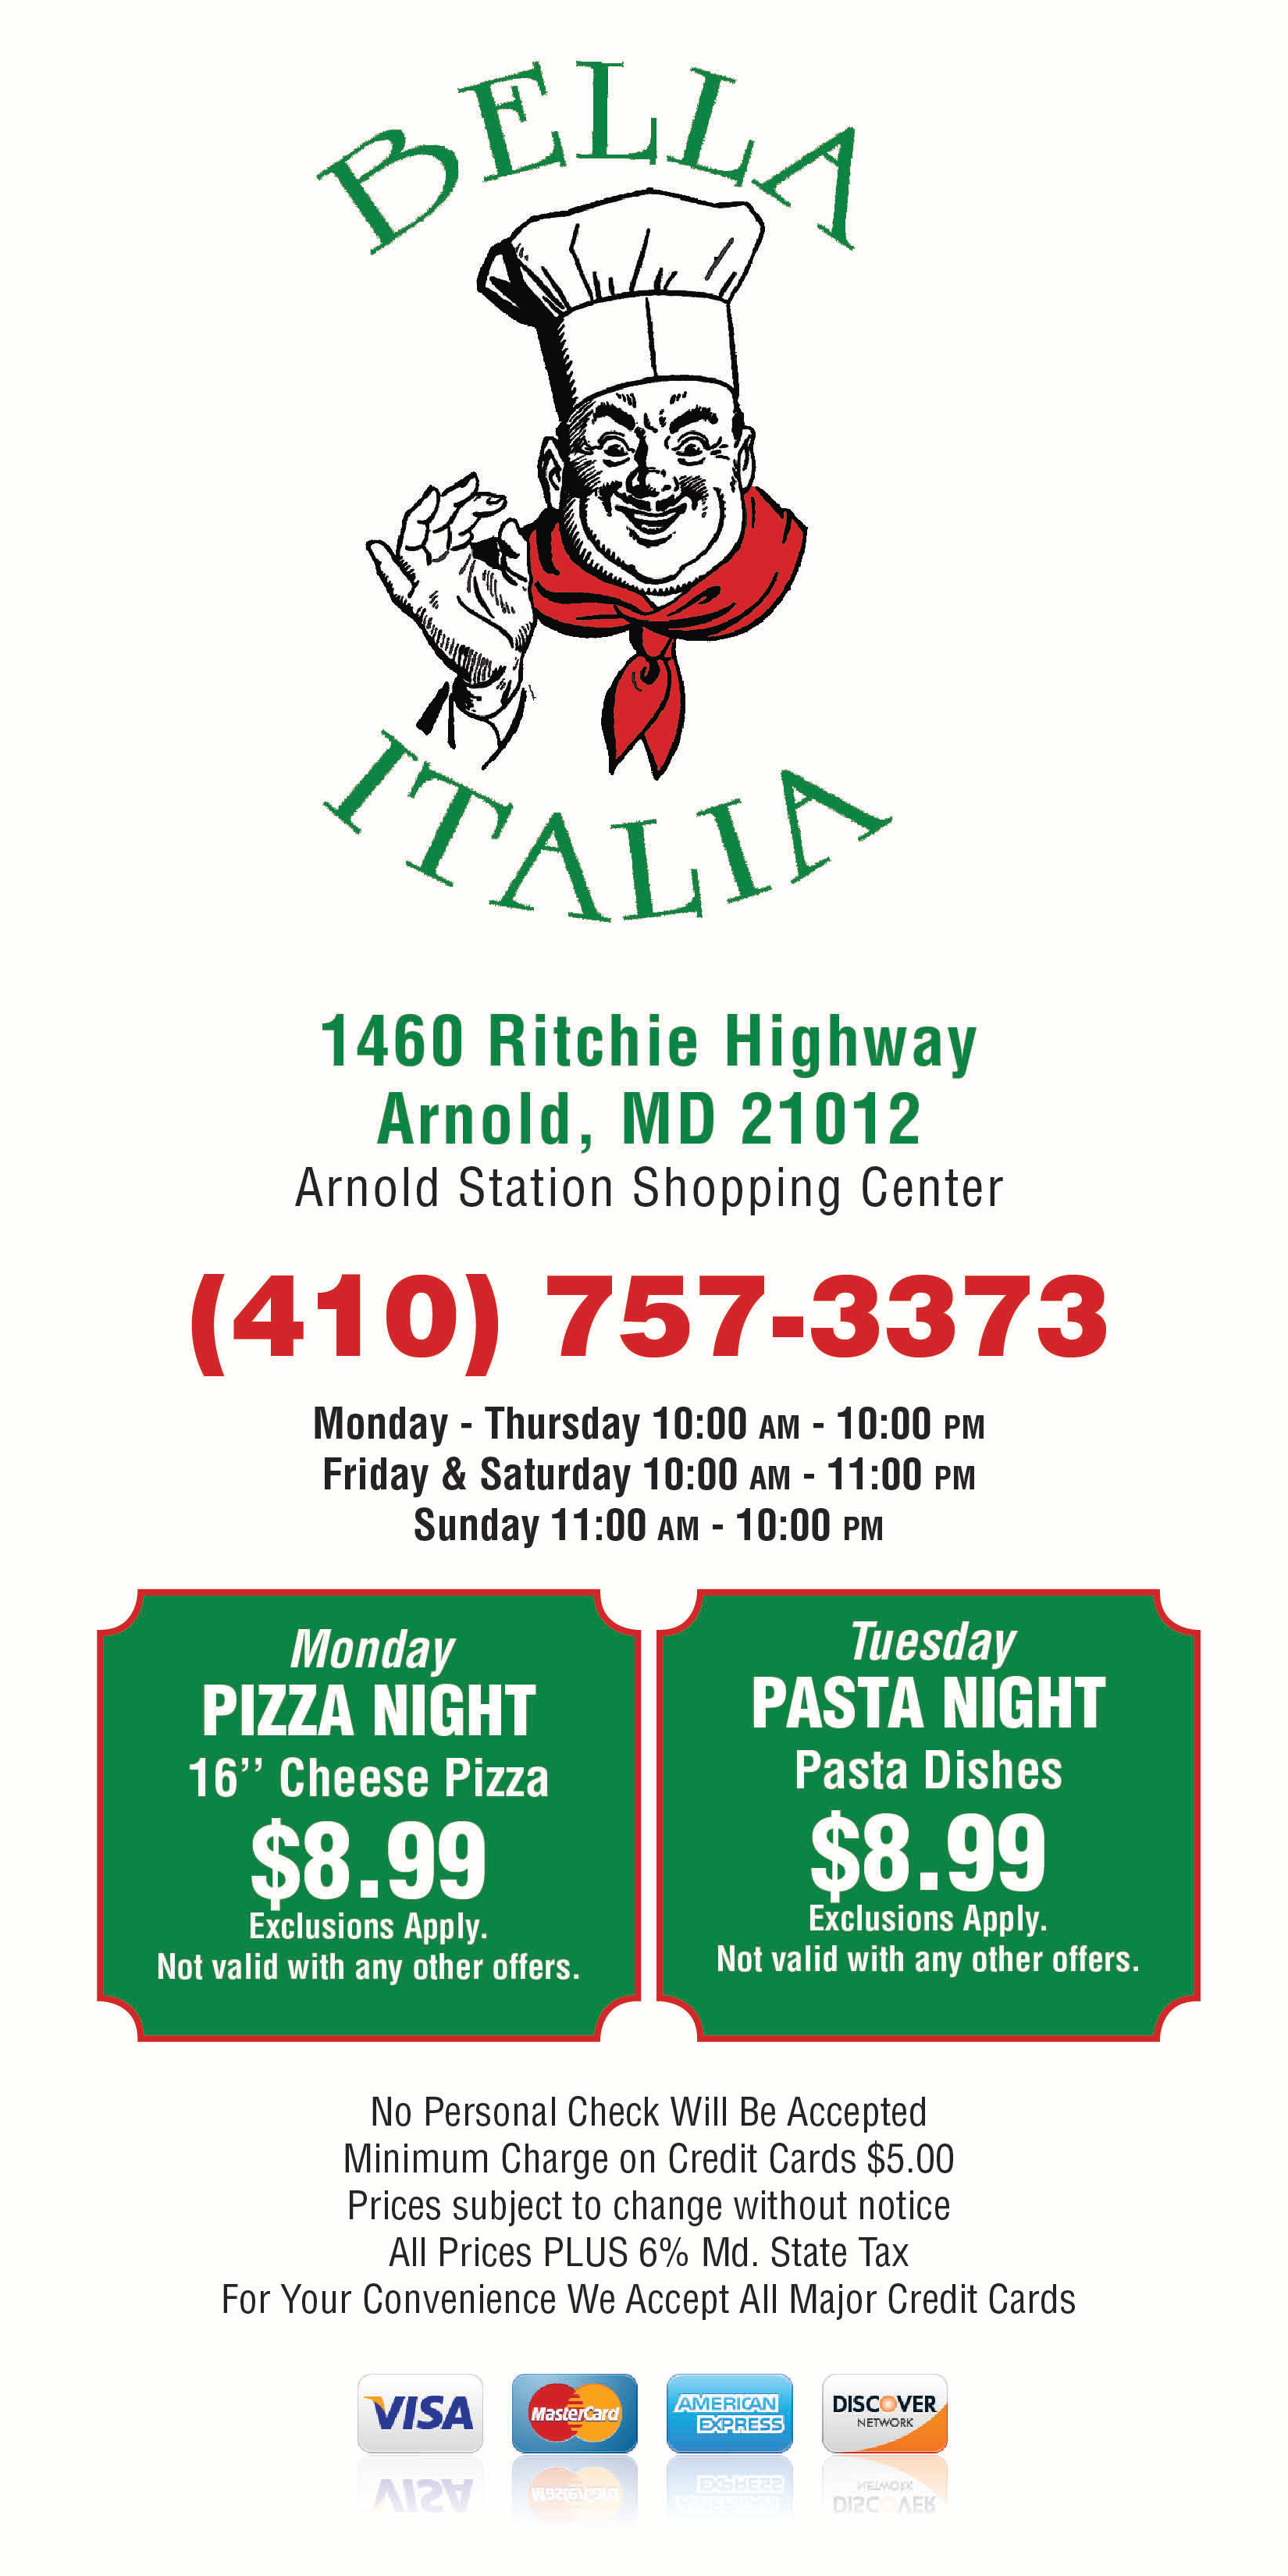 Welcome To Bella Italia. Our hours are Monday - Thursday 10:00 AM - 10:00 PM, Friday & Saturday 10:00 AM - 11 :00 PM, Sunday 11:00 AM - 10:00 PM